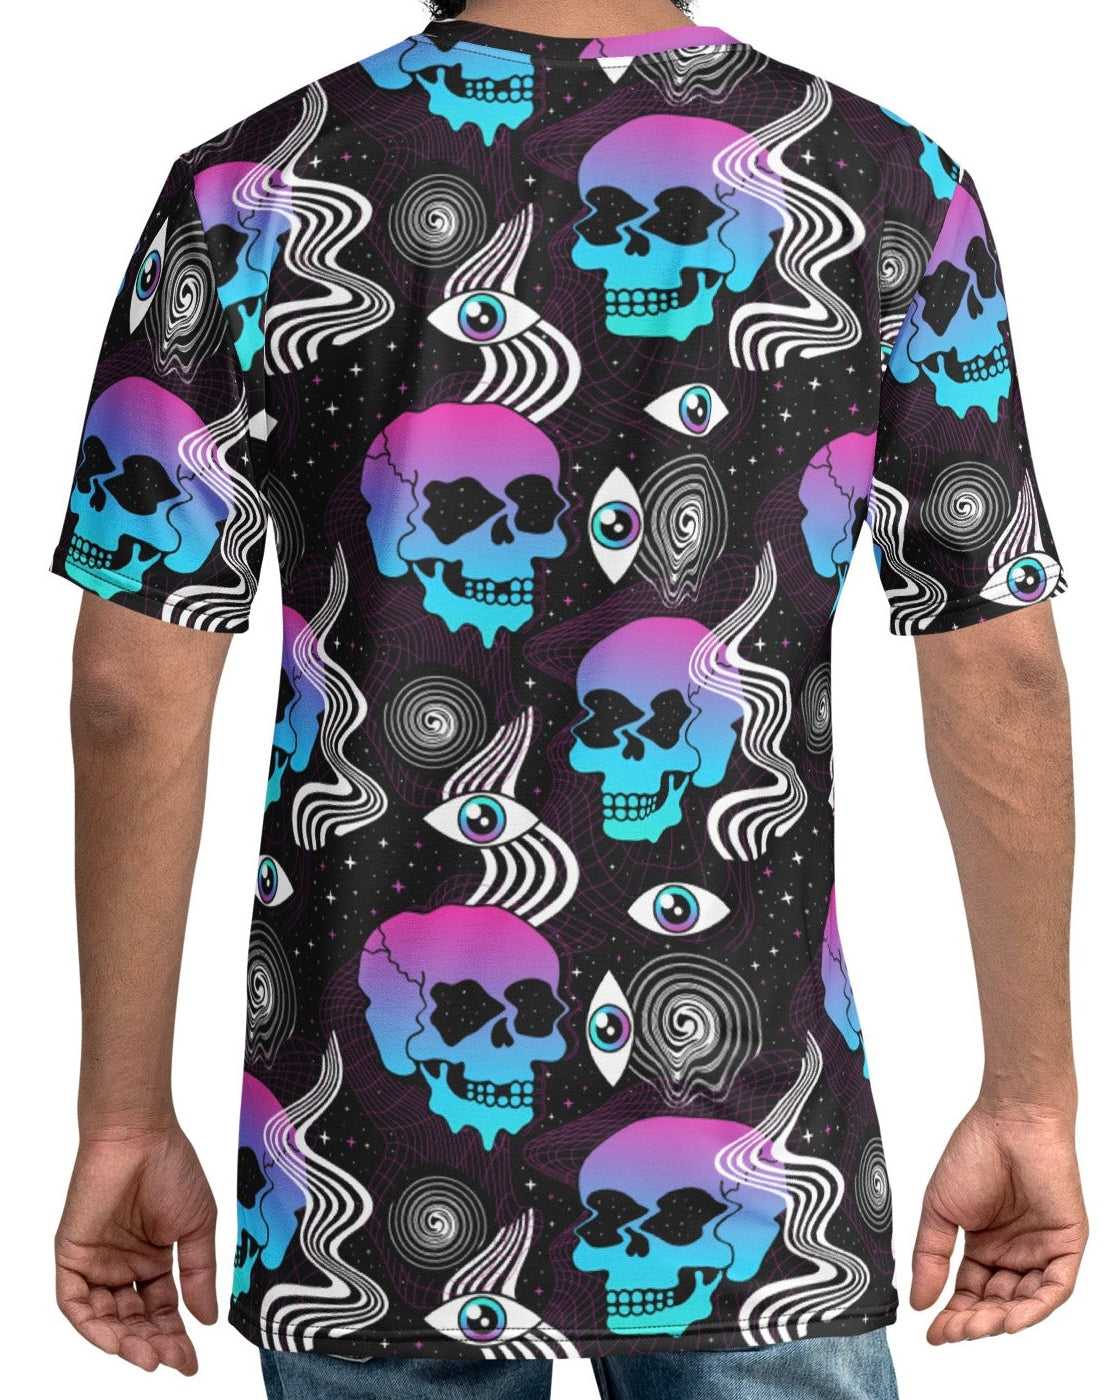 Ego Death T-Shirt, T-Shirt, - One Stop Rave